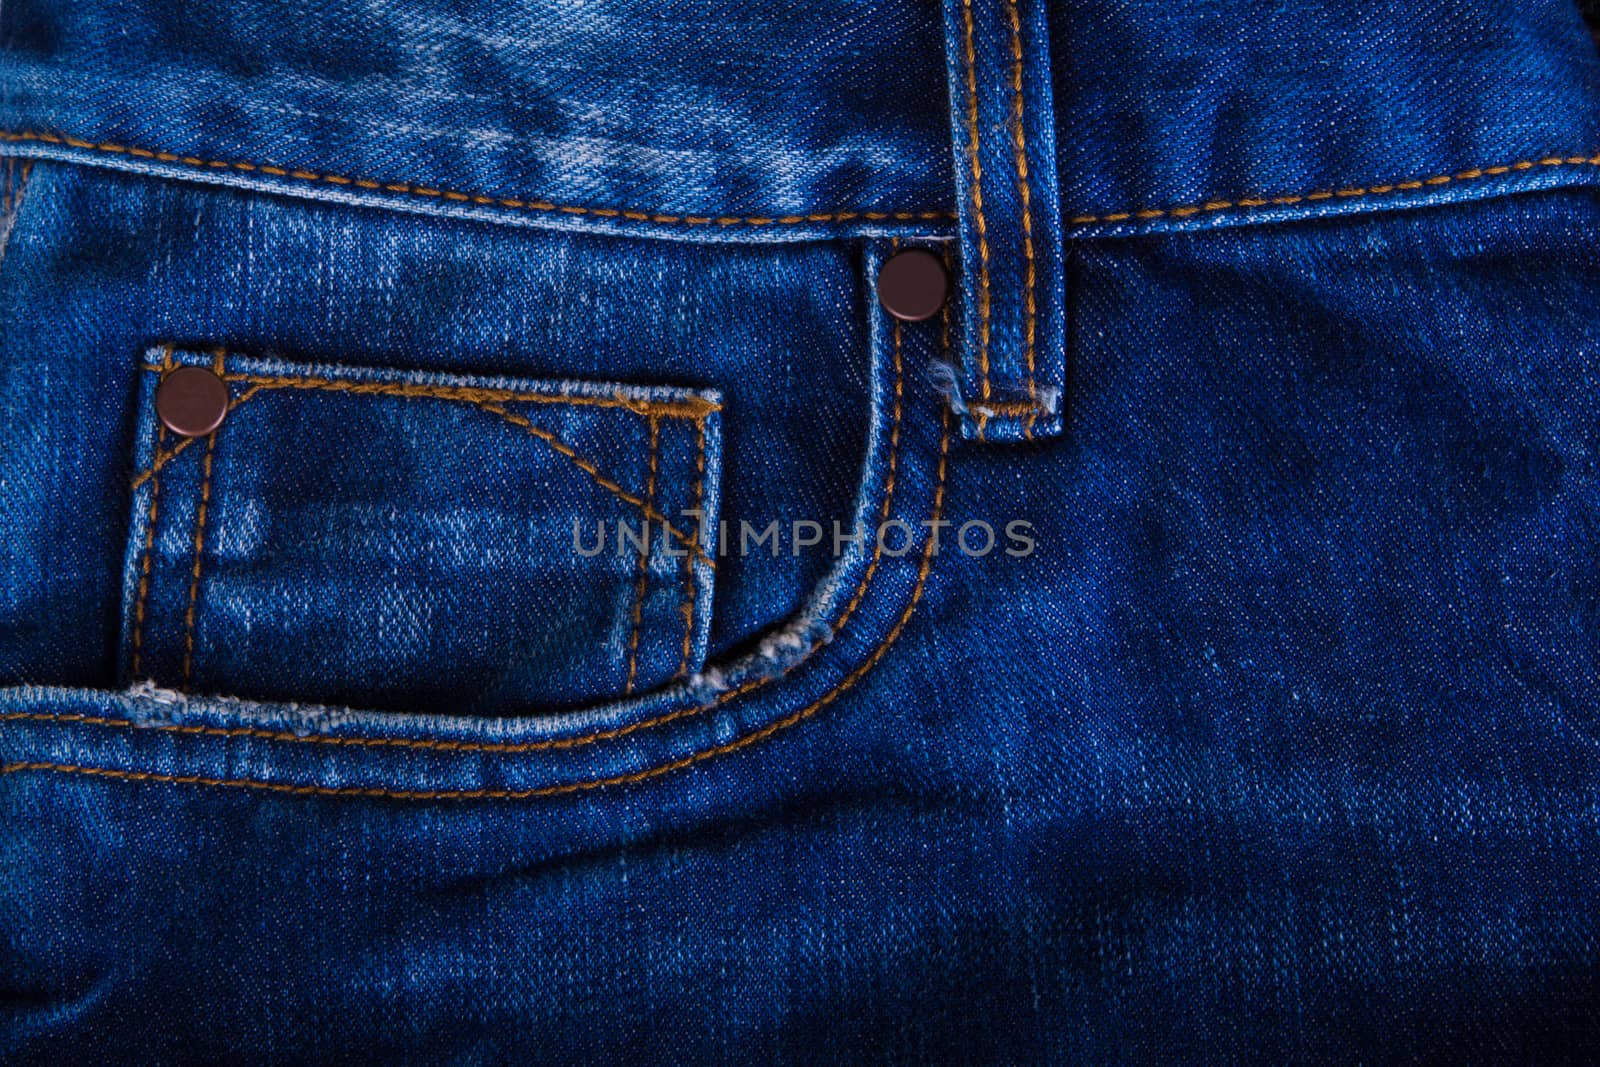 Jeans pocket in close up - Stock Images